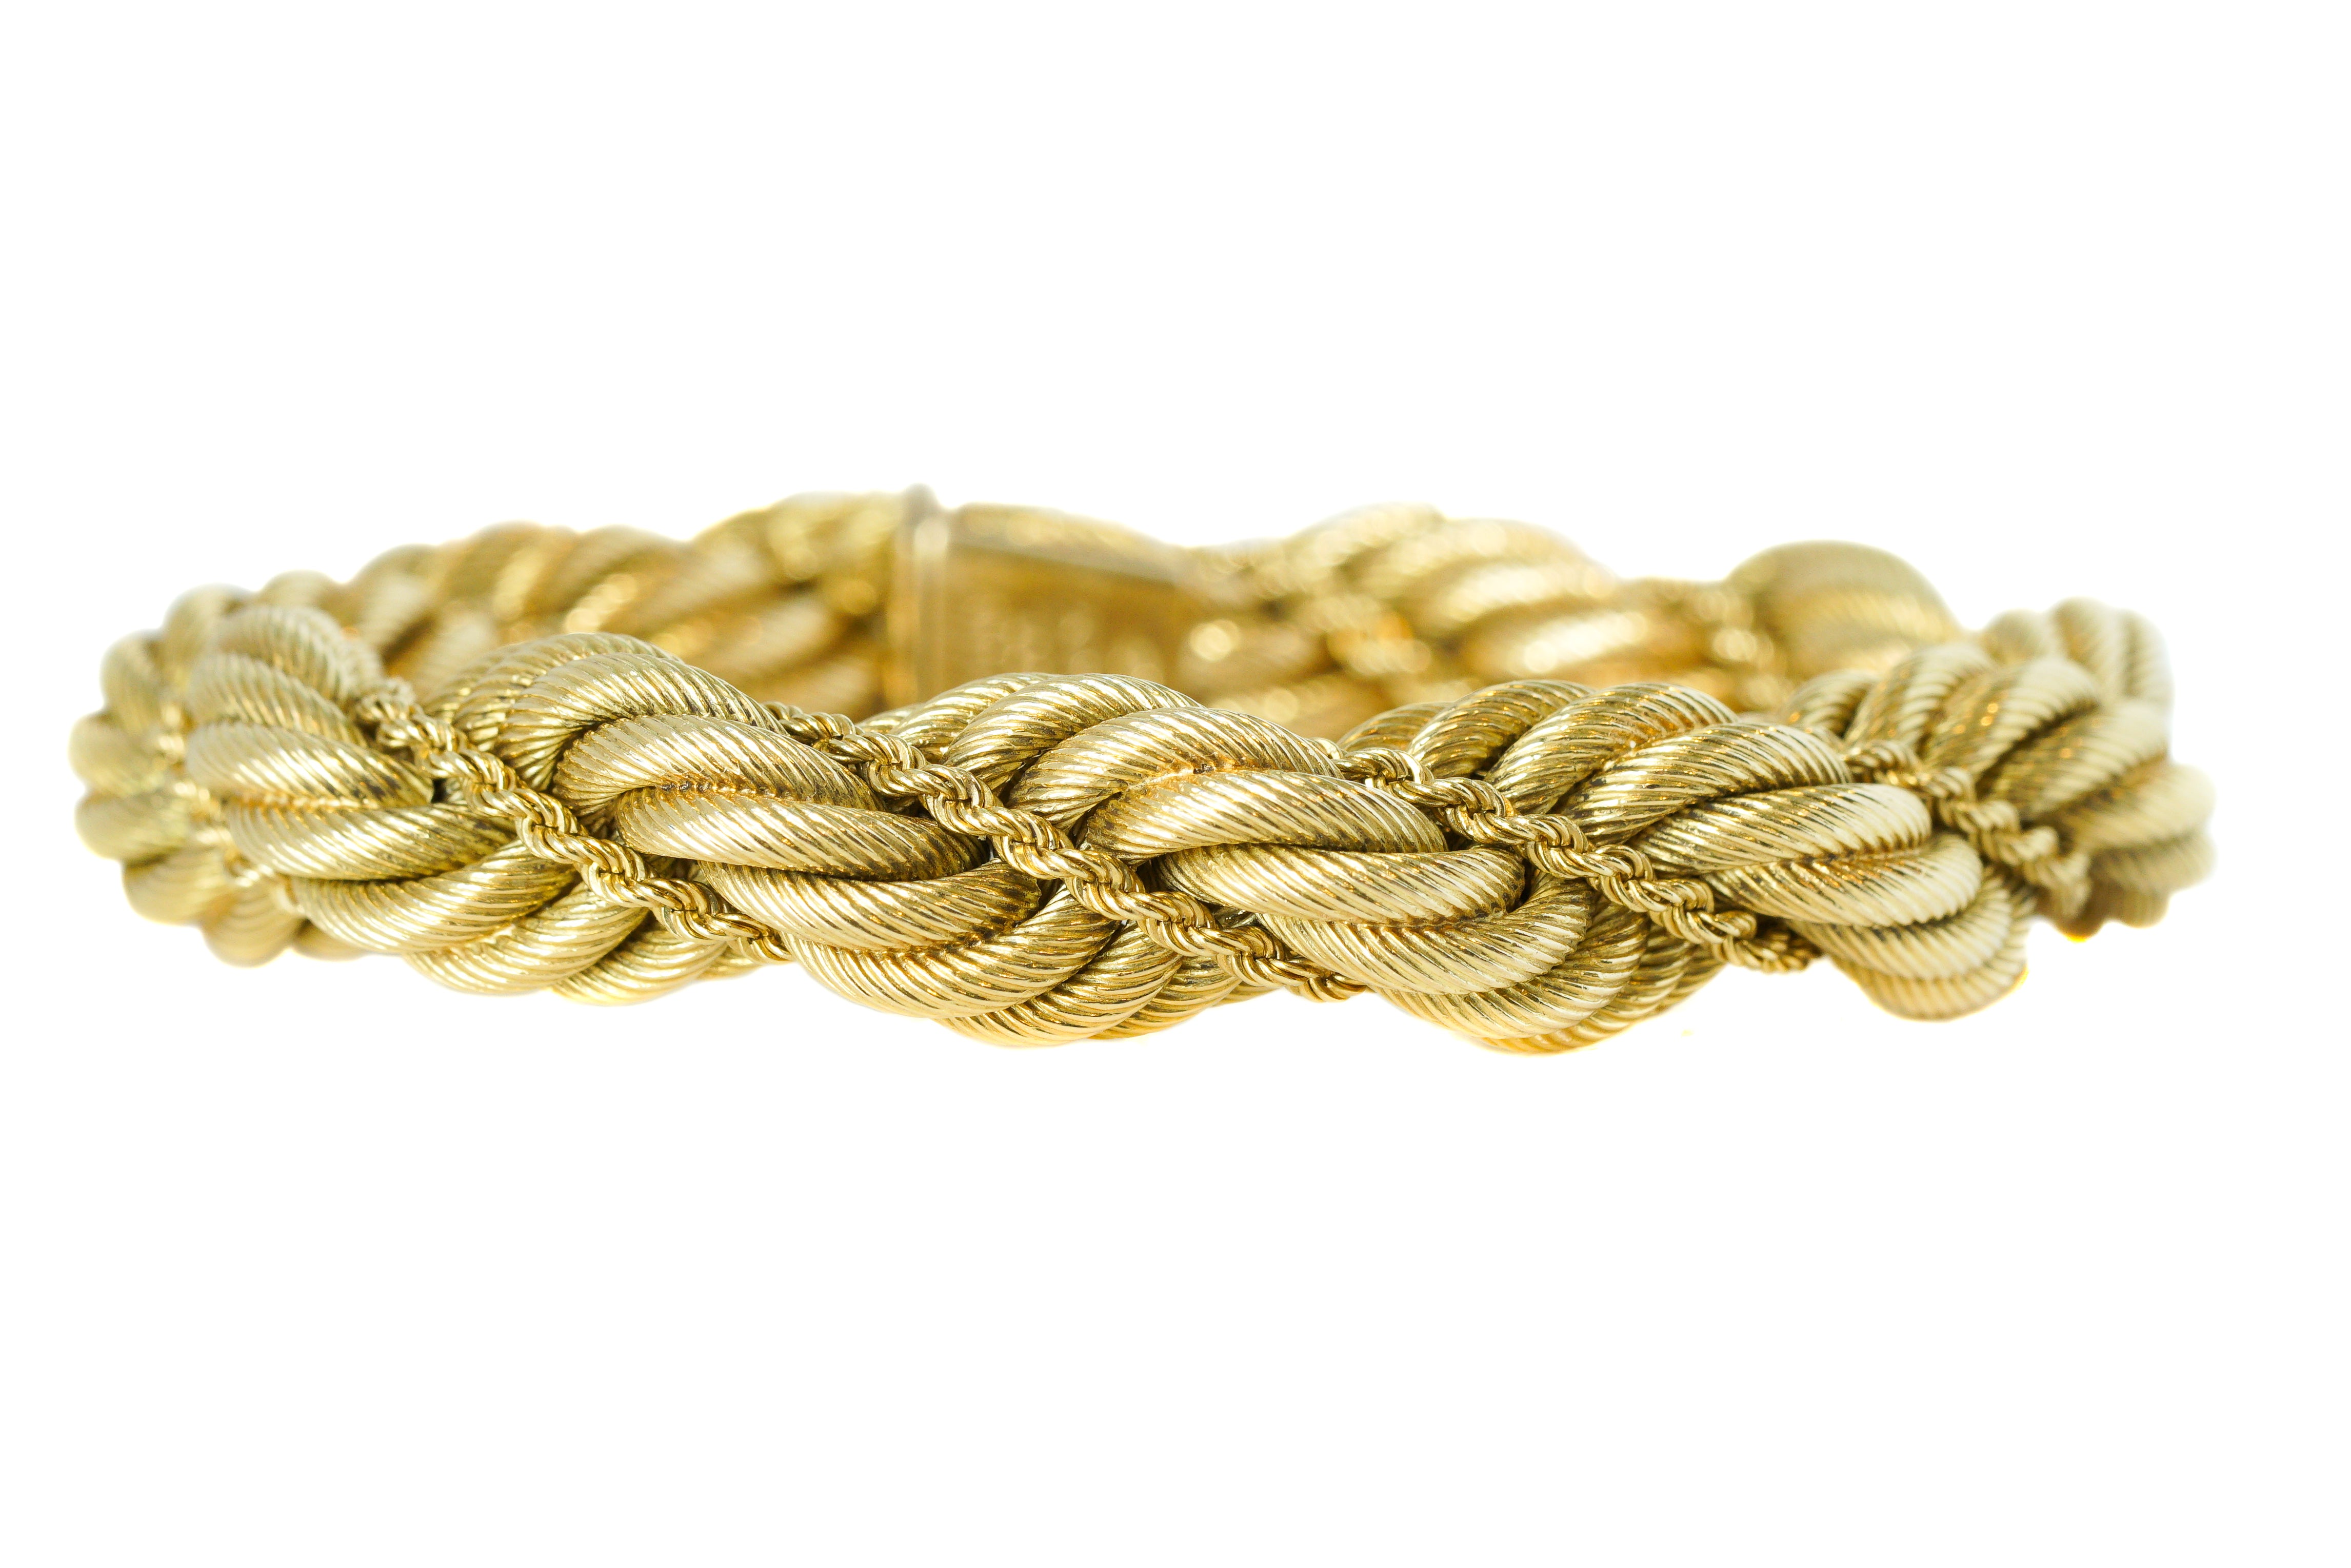 Tiffany and Co. 18k Gold Twisted Rope Bracelet - The Verma Group